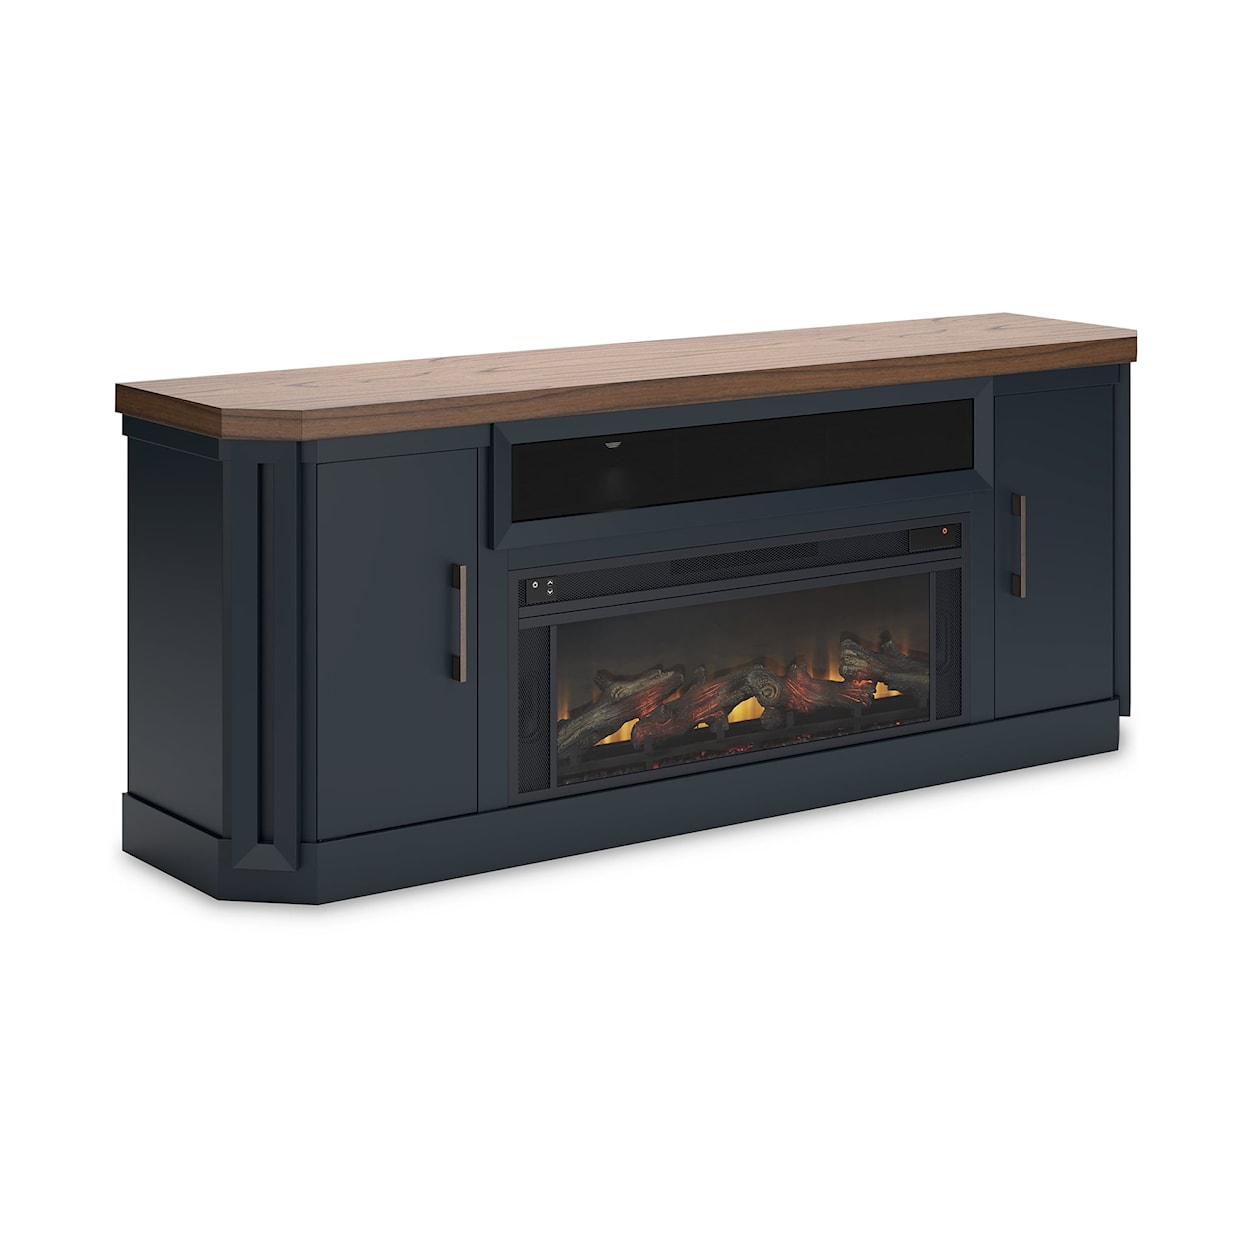 Signature Landocken 83" TV Stand with Electric Fireplace